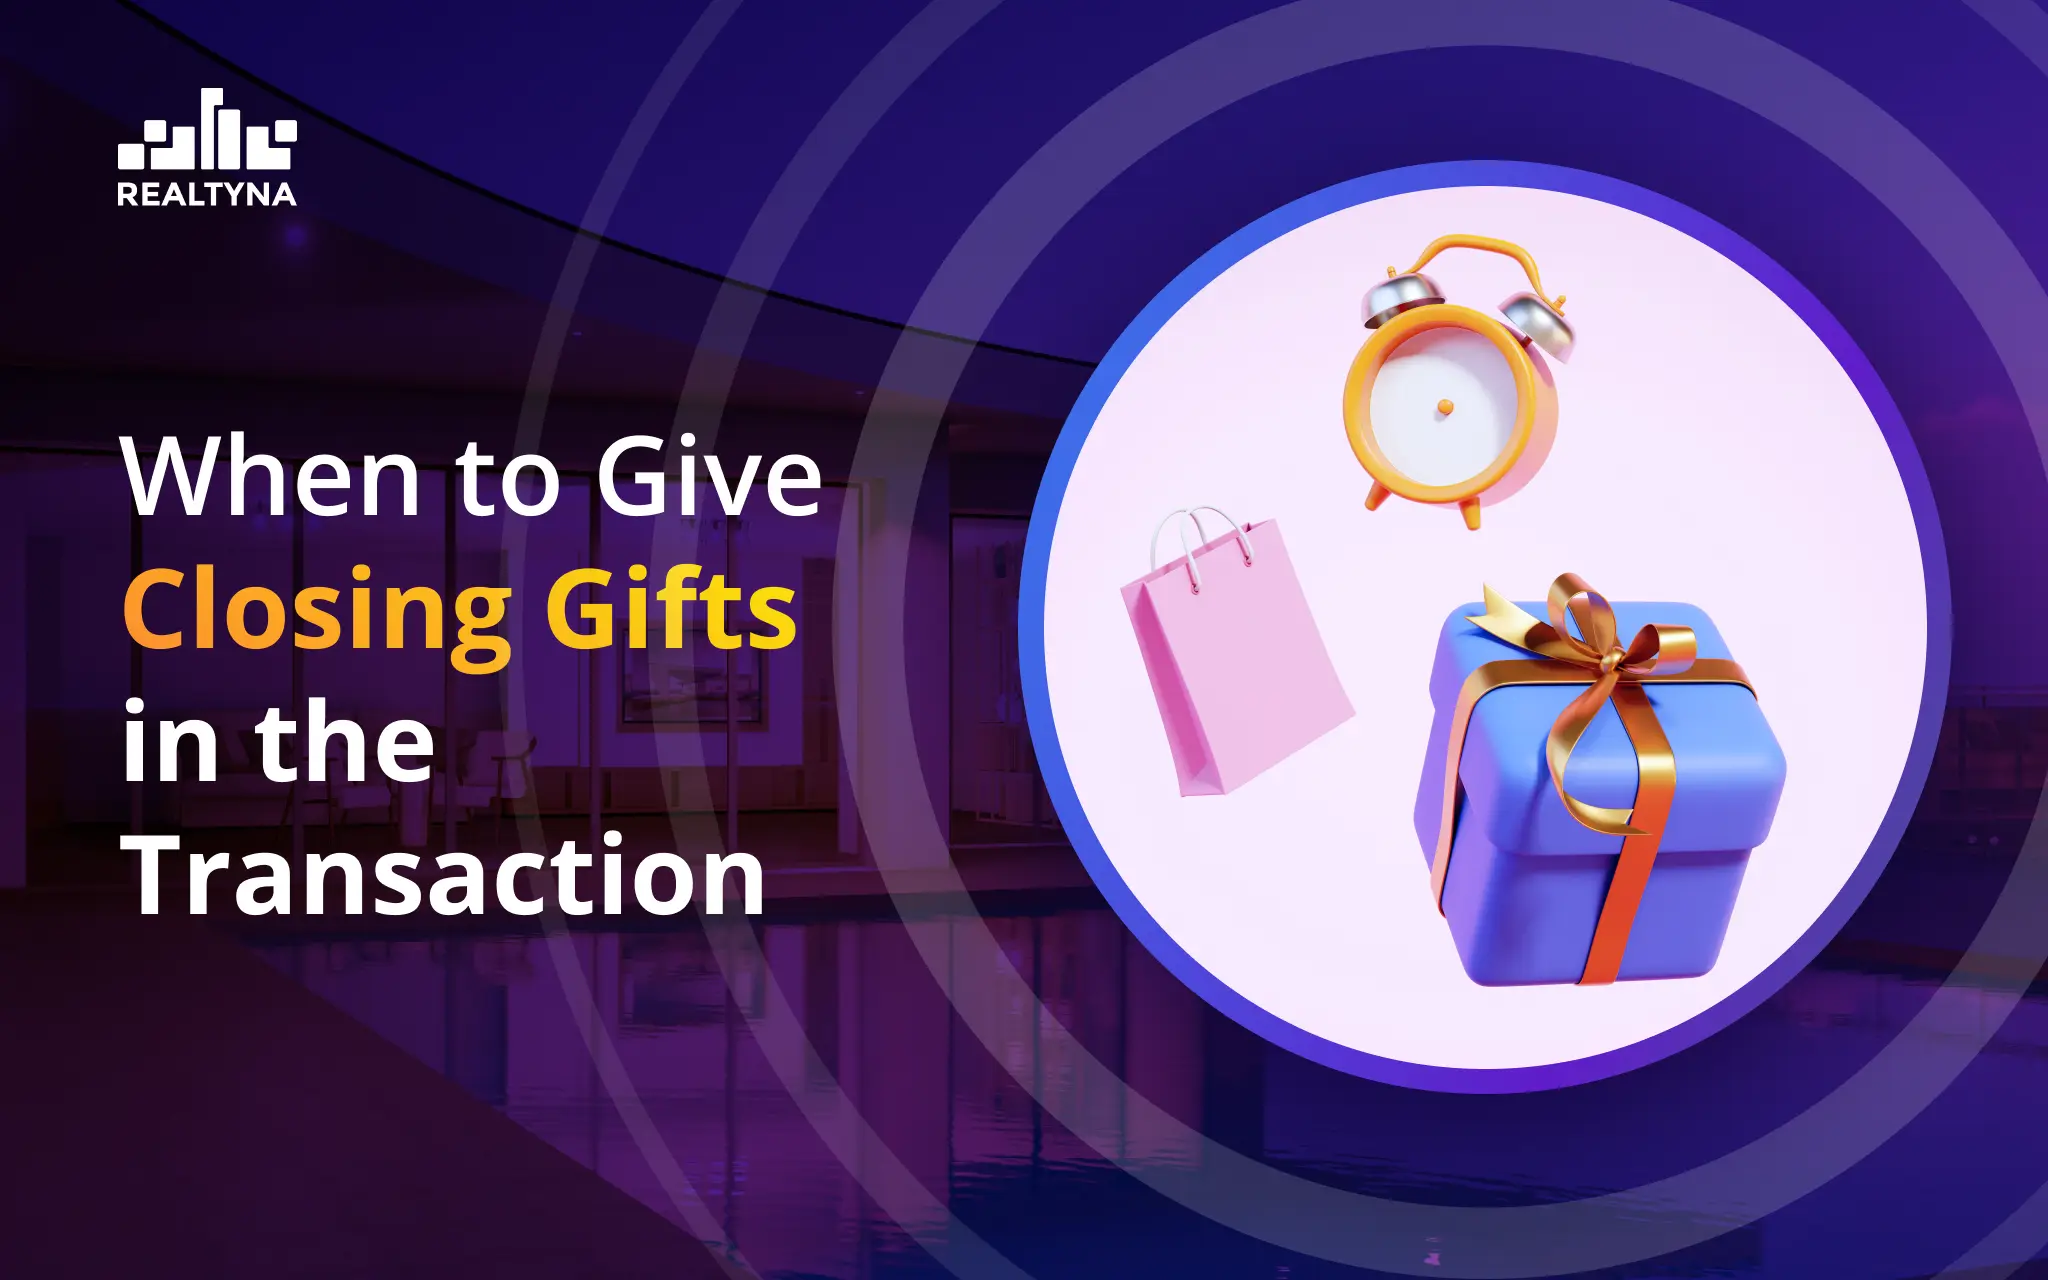 When to Give Closing Gifts in the Transaction